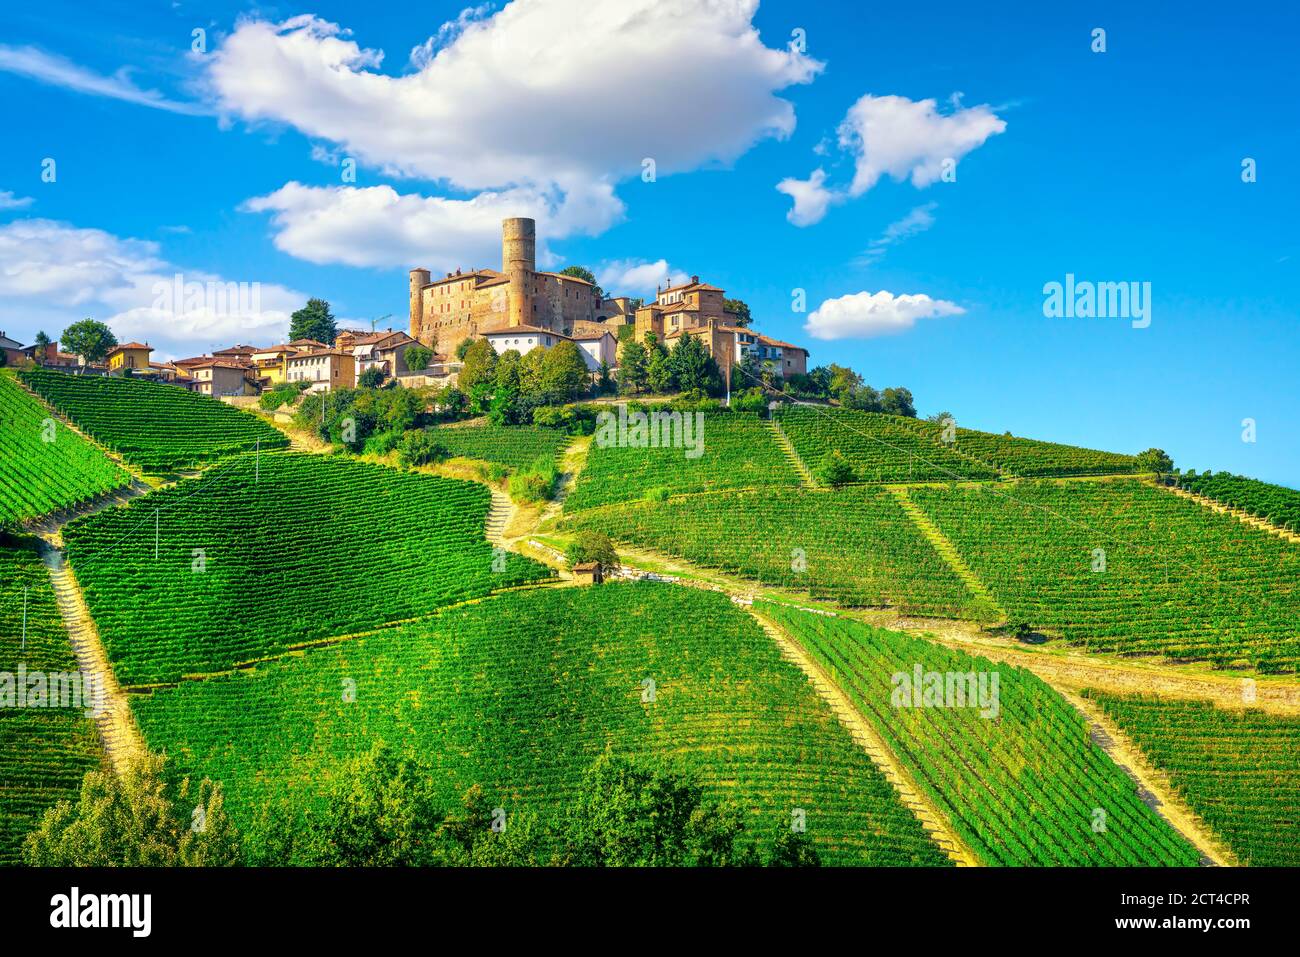 Langhe vineyards and Castiglione Falletto village, Unesco Site, Piedmont, Northern Italy Europe. Stock Photo